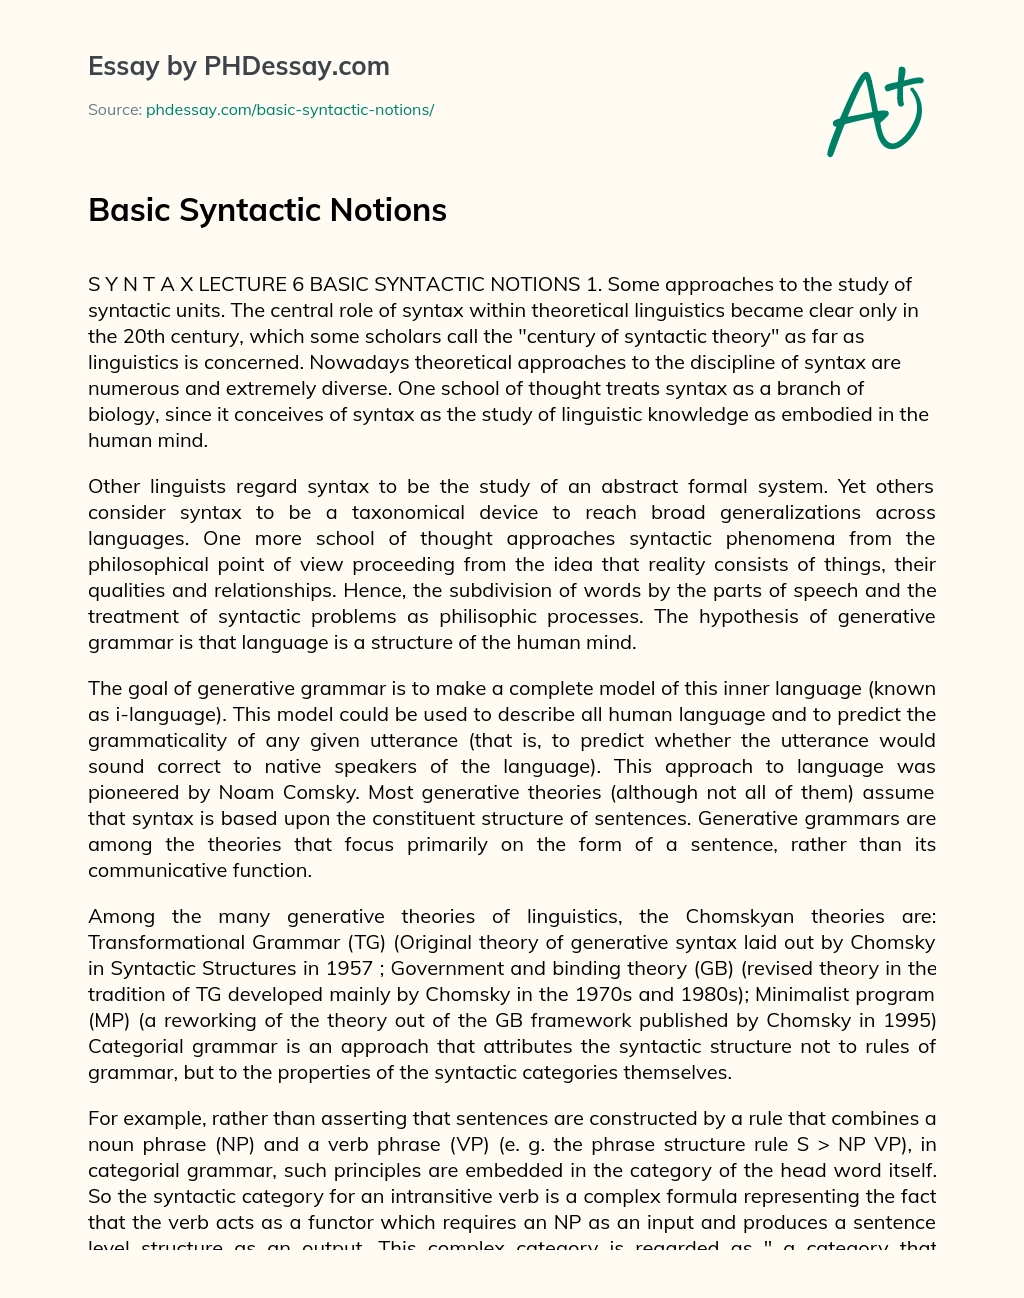 Basic Syntactic Notions essay